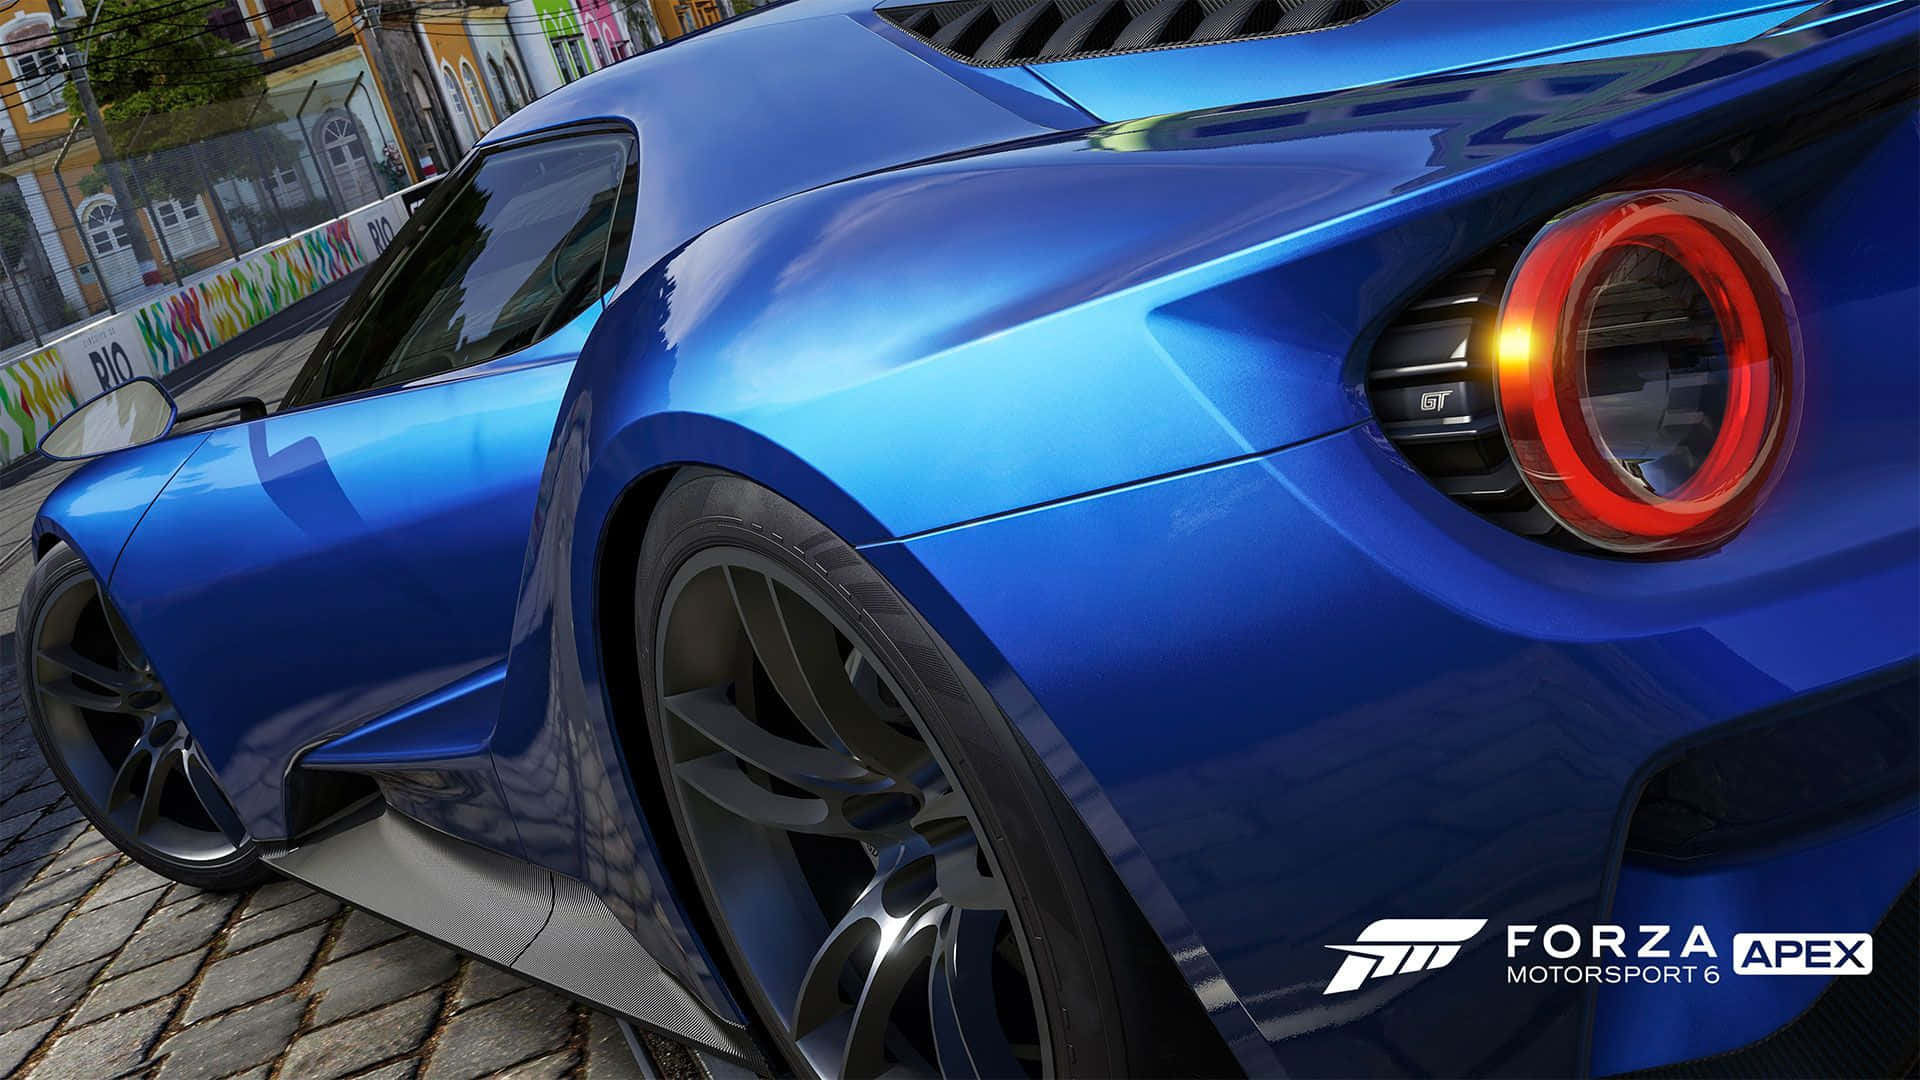 Dynamic Racing Action in Forza Motorsport Wallpaper